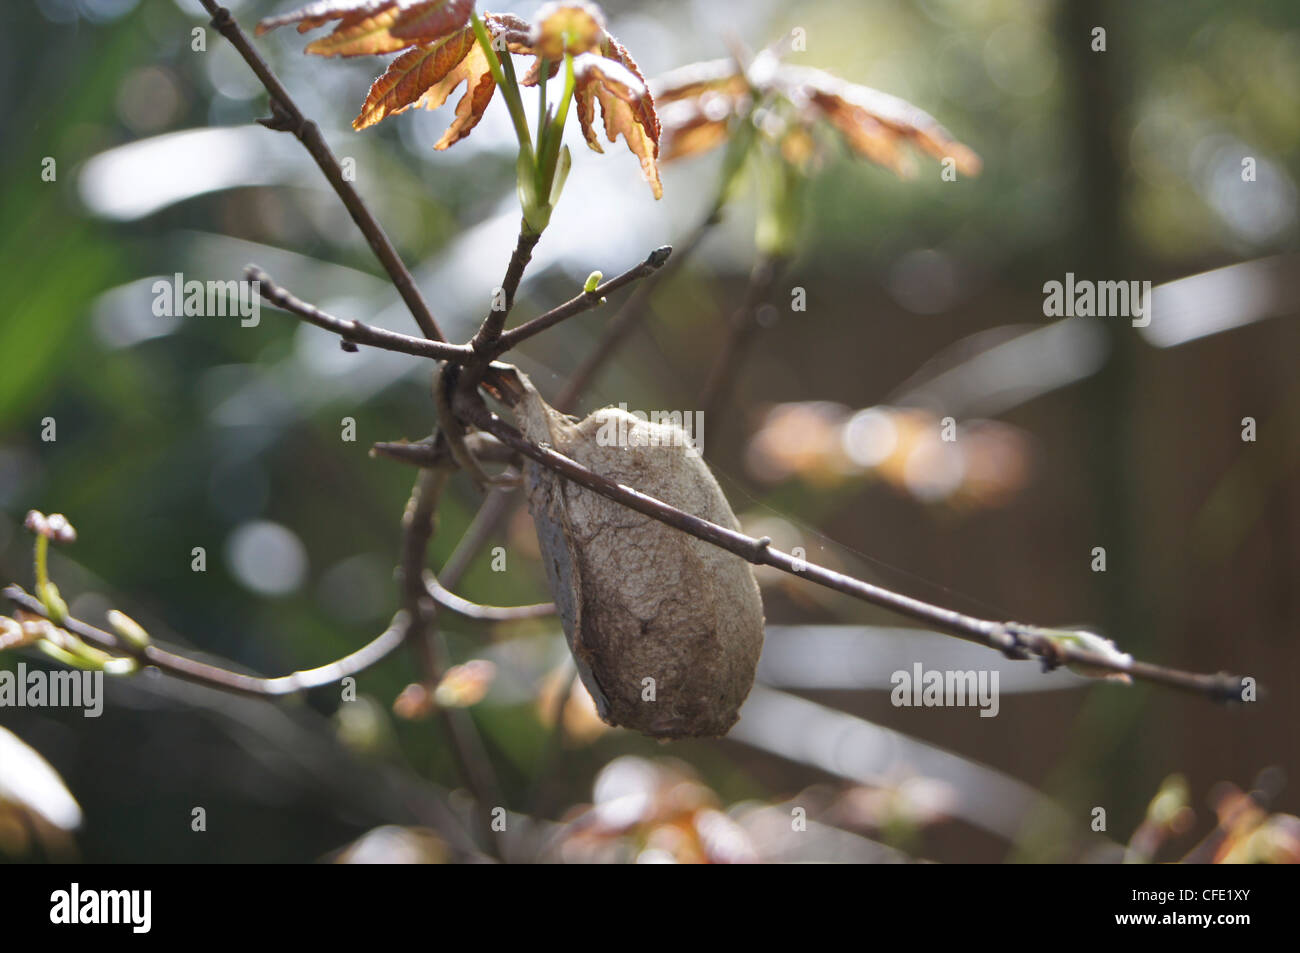 Giant silk moth cocoon on red maple tree Stock Photo